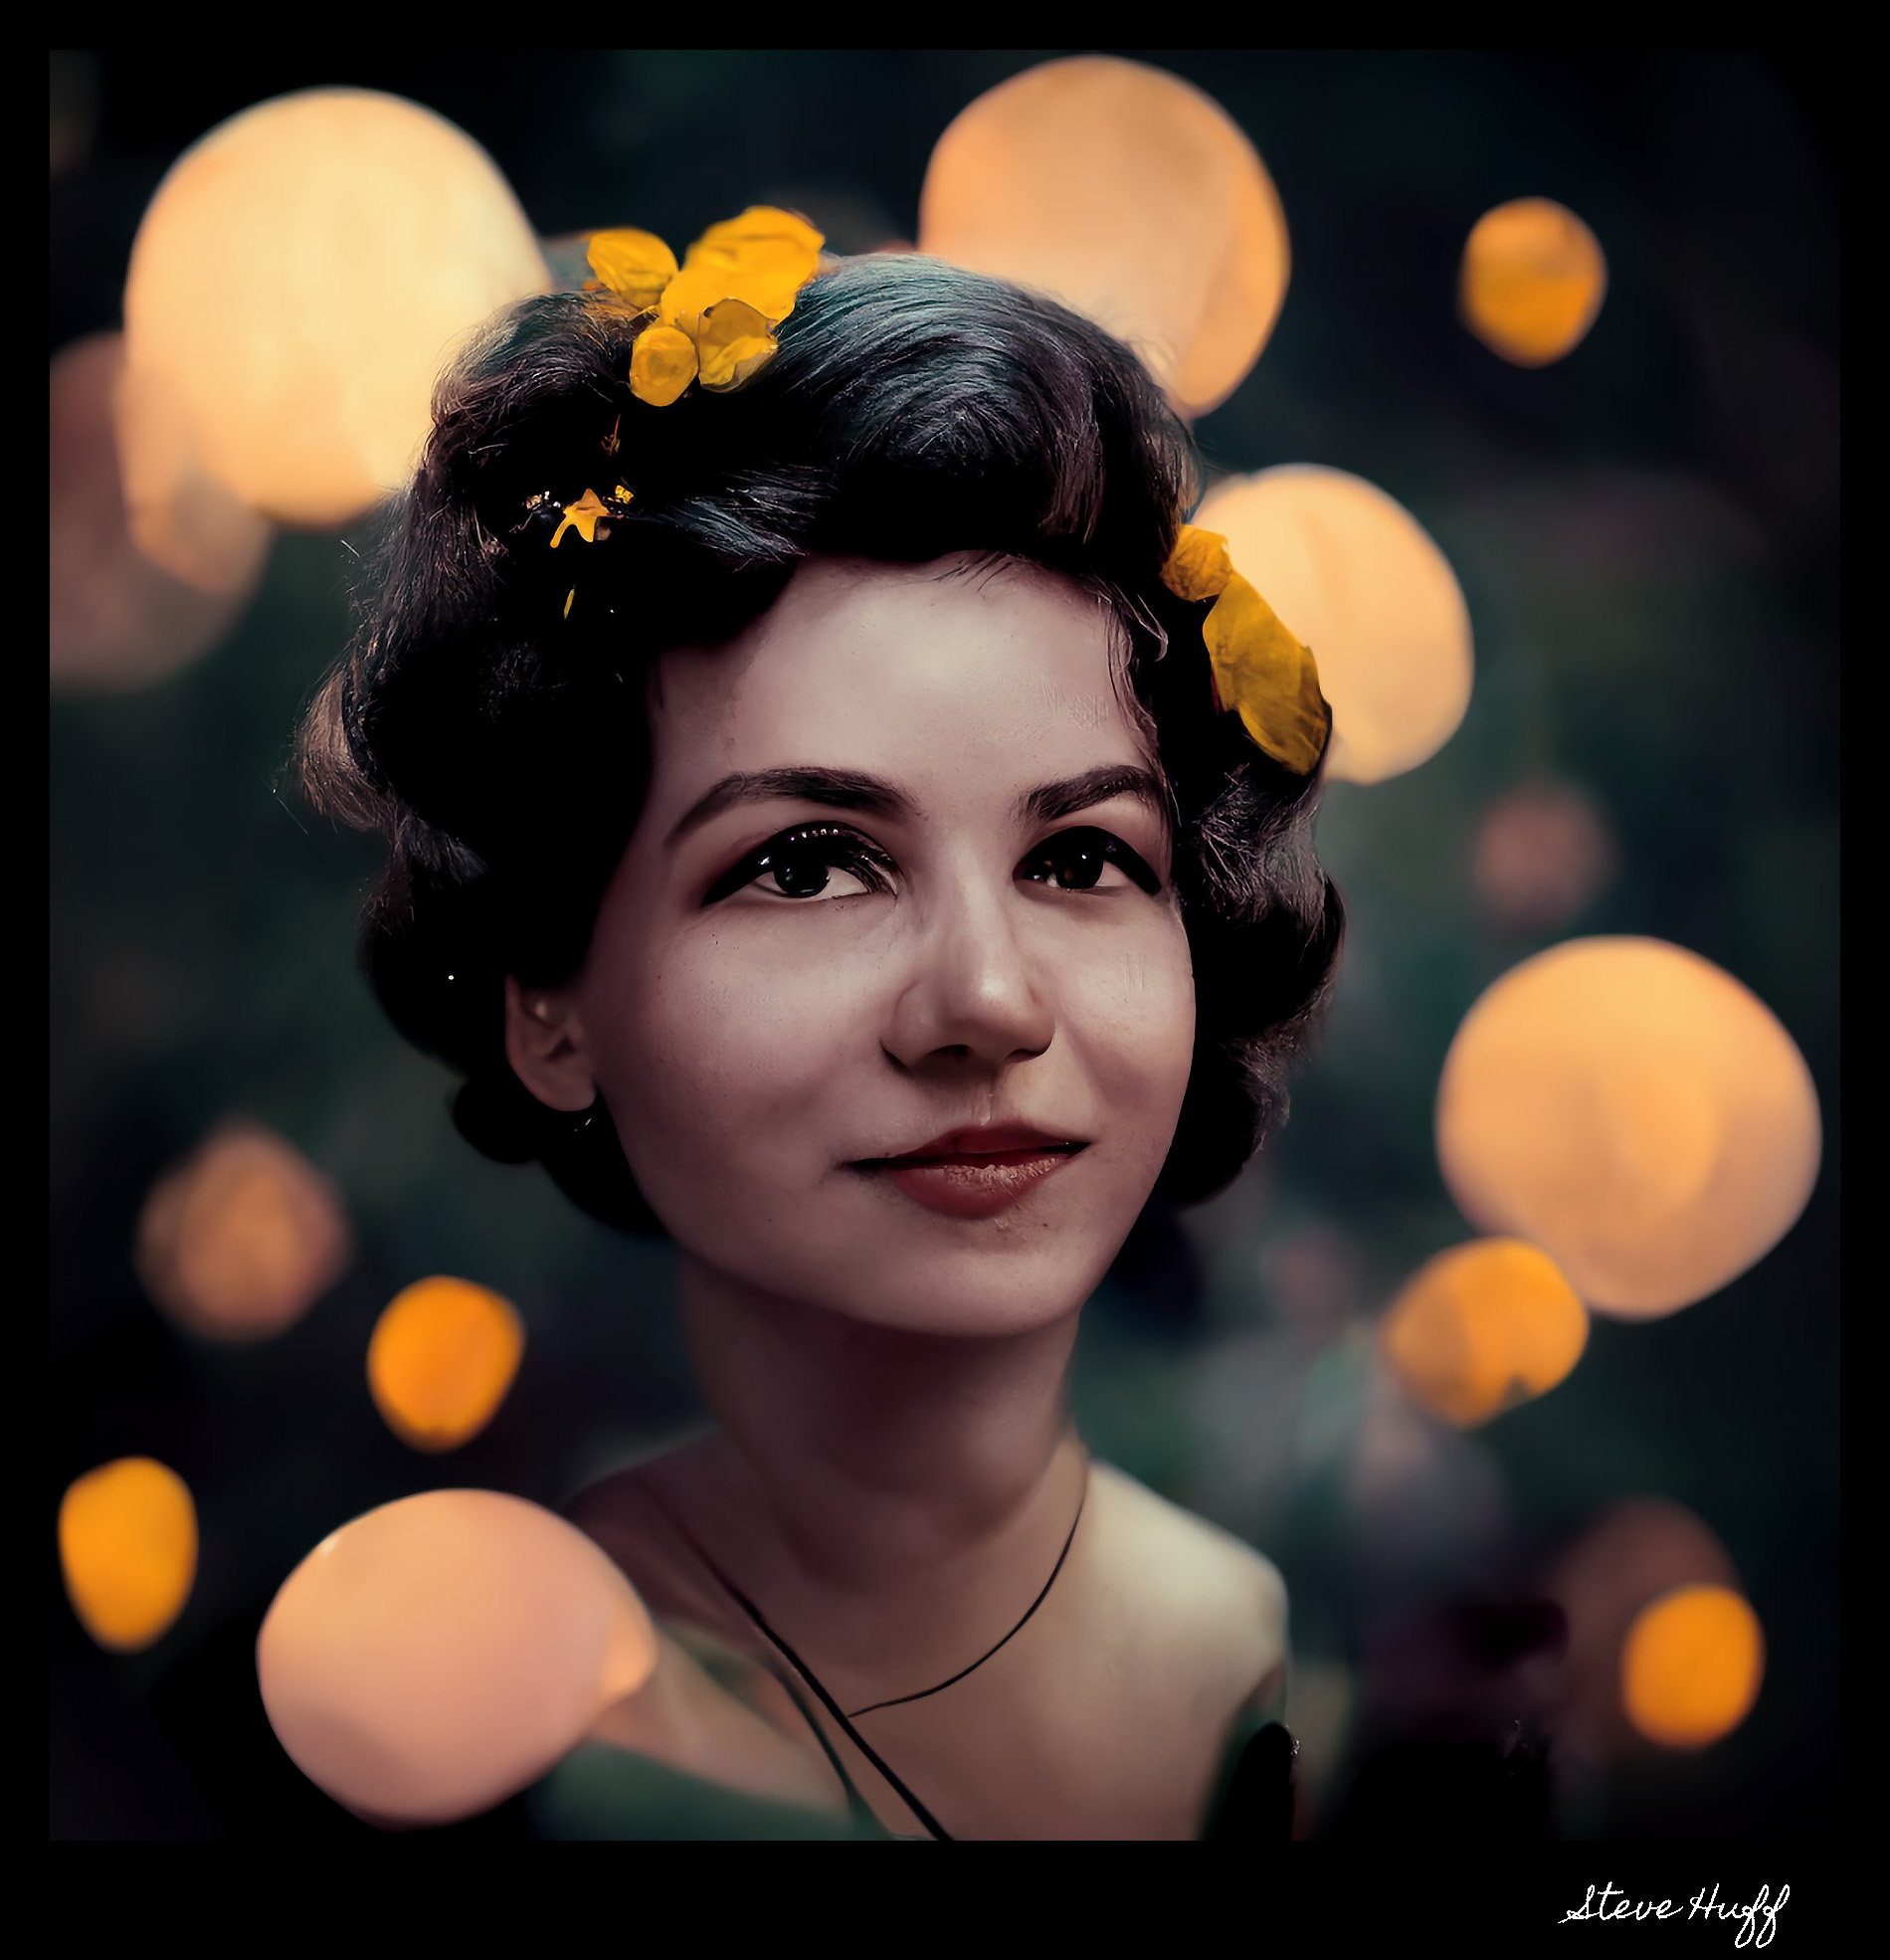 SteveALArt_beautiful_woman_1950s_with_muted_color_hyper_realist_1dac49ff-8ac3-4cd2-a16f-e738d78af472